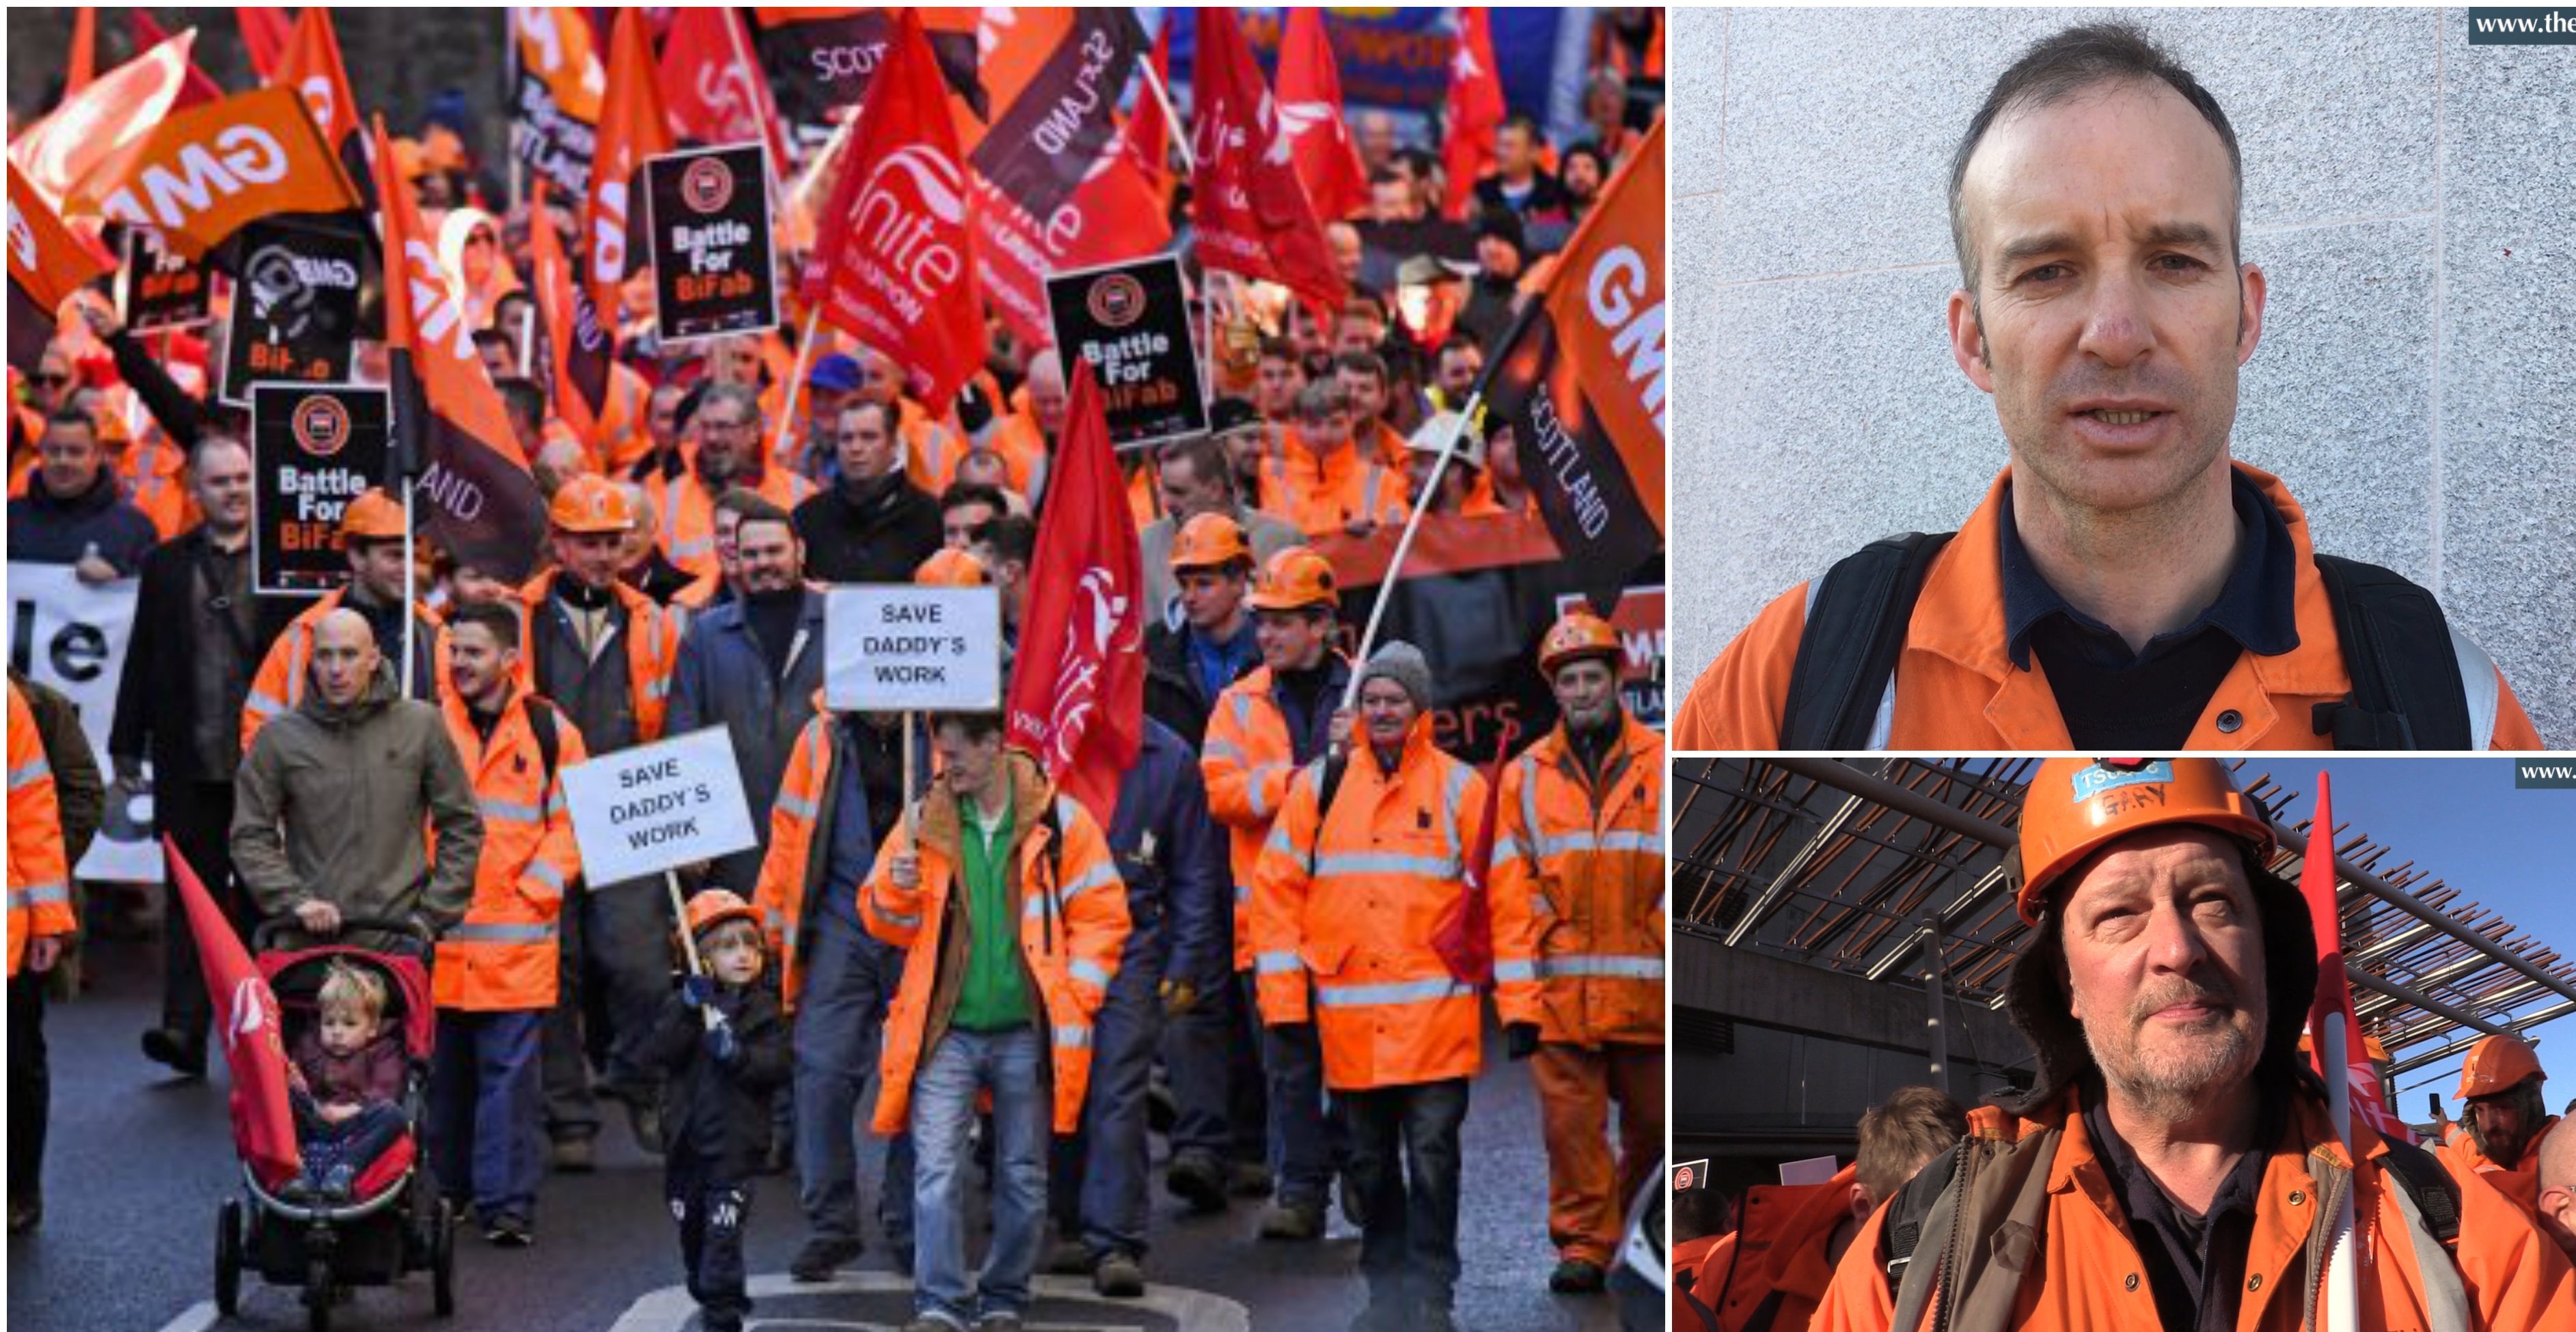 BiFab employees on the Royal Mile. Workers Jimmy Robertson (top right) and Gary Wain (bottom right)